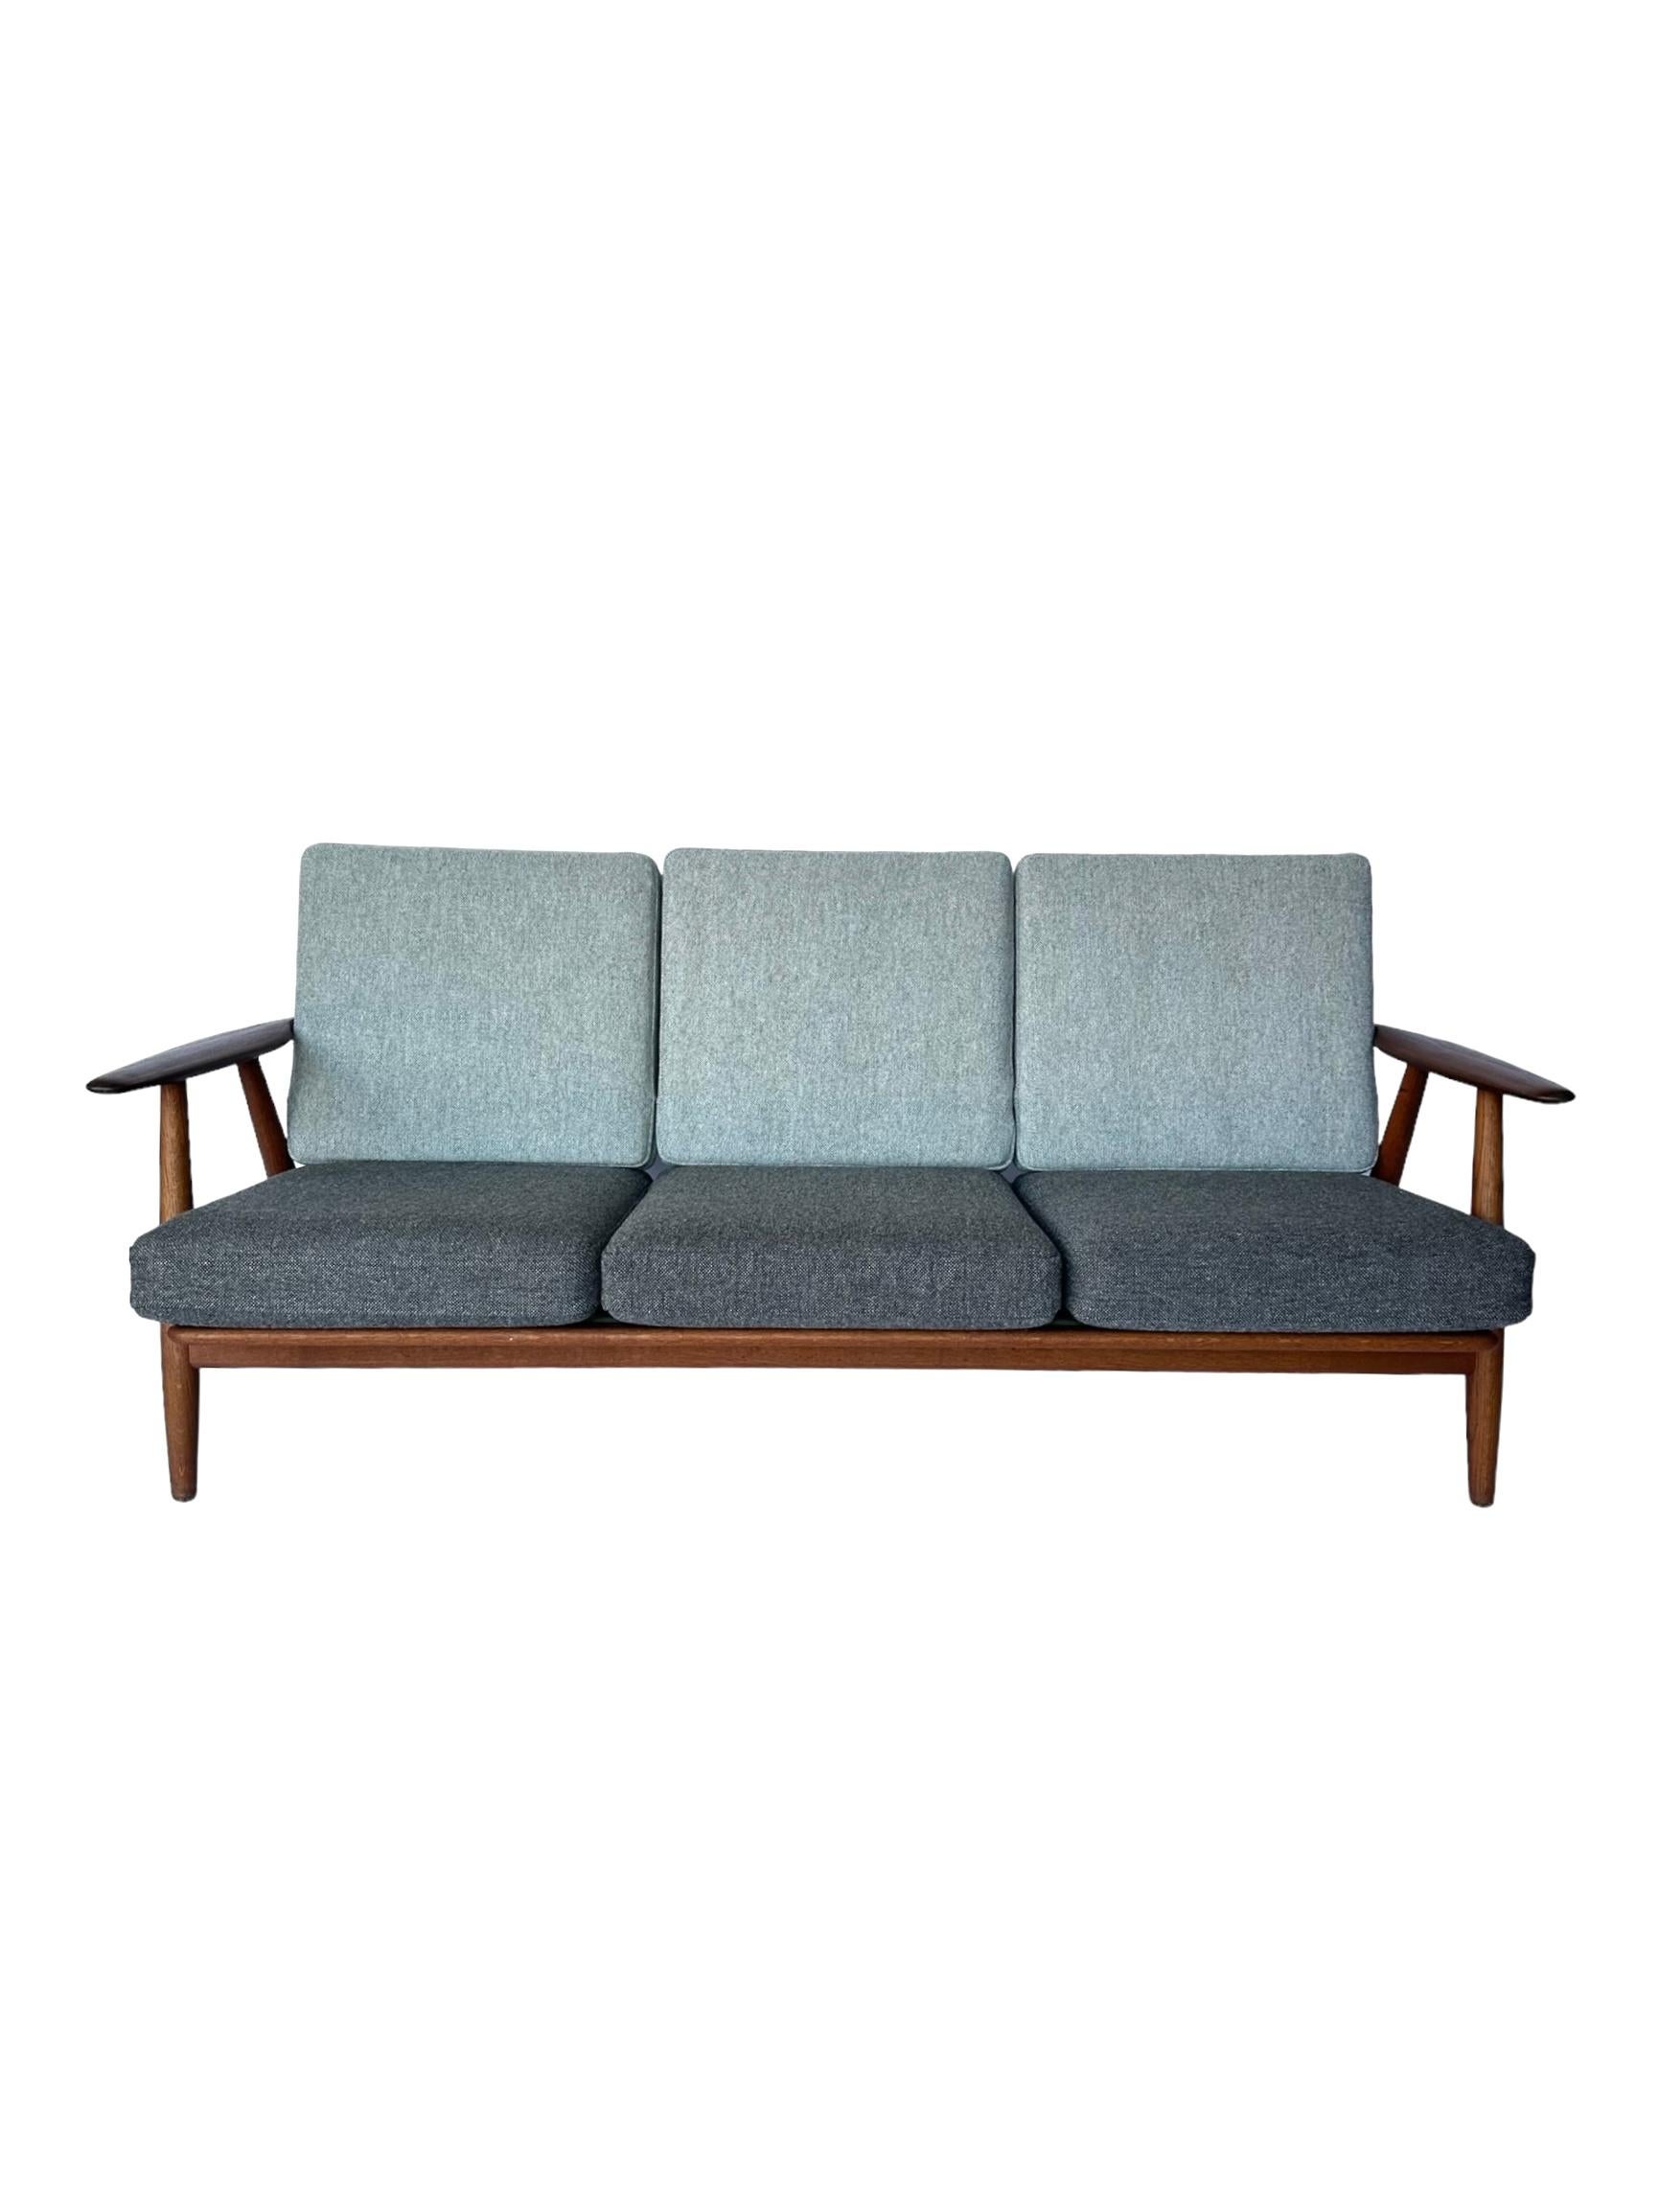 Designed by Hans Wegner for Getama in 1955, the 240 “Cigar” sofa features classic Danish minimalist elegance in craftsmanship and manufacture. Iconic sculpted arms and legs give the design its Cigar moniker. Built by Getama in Denmark and stamped